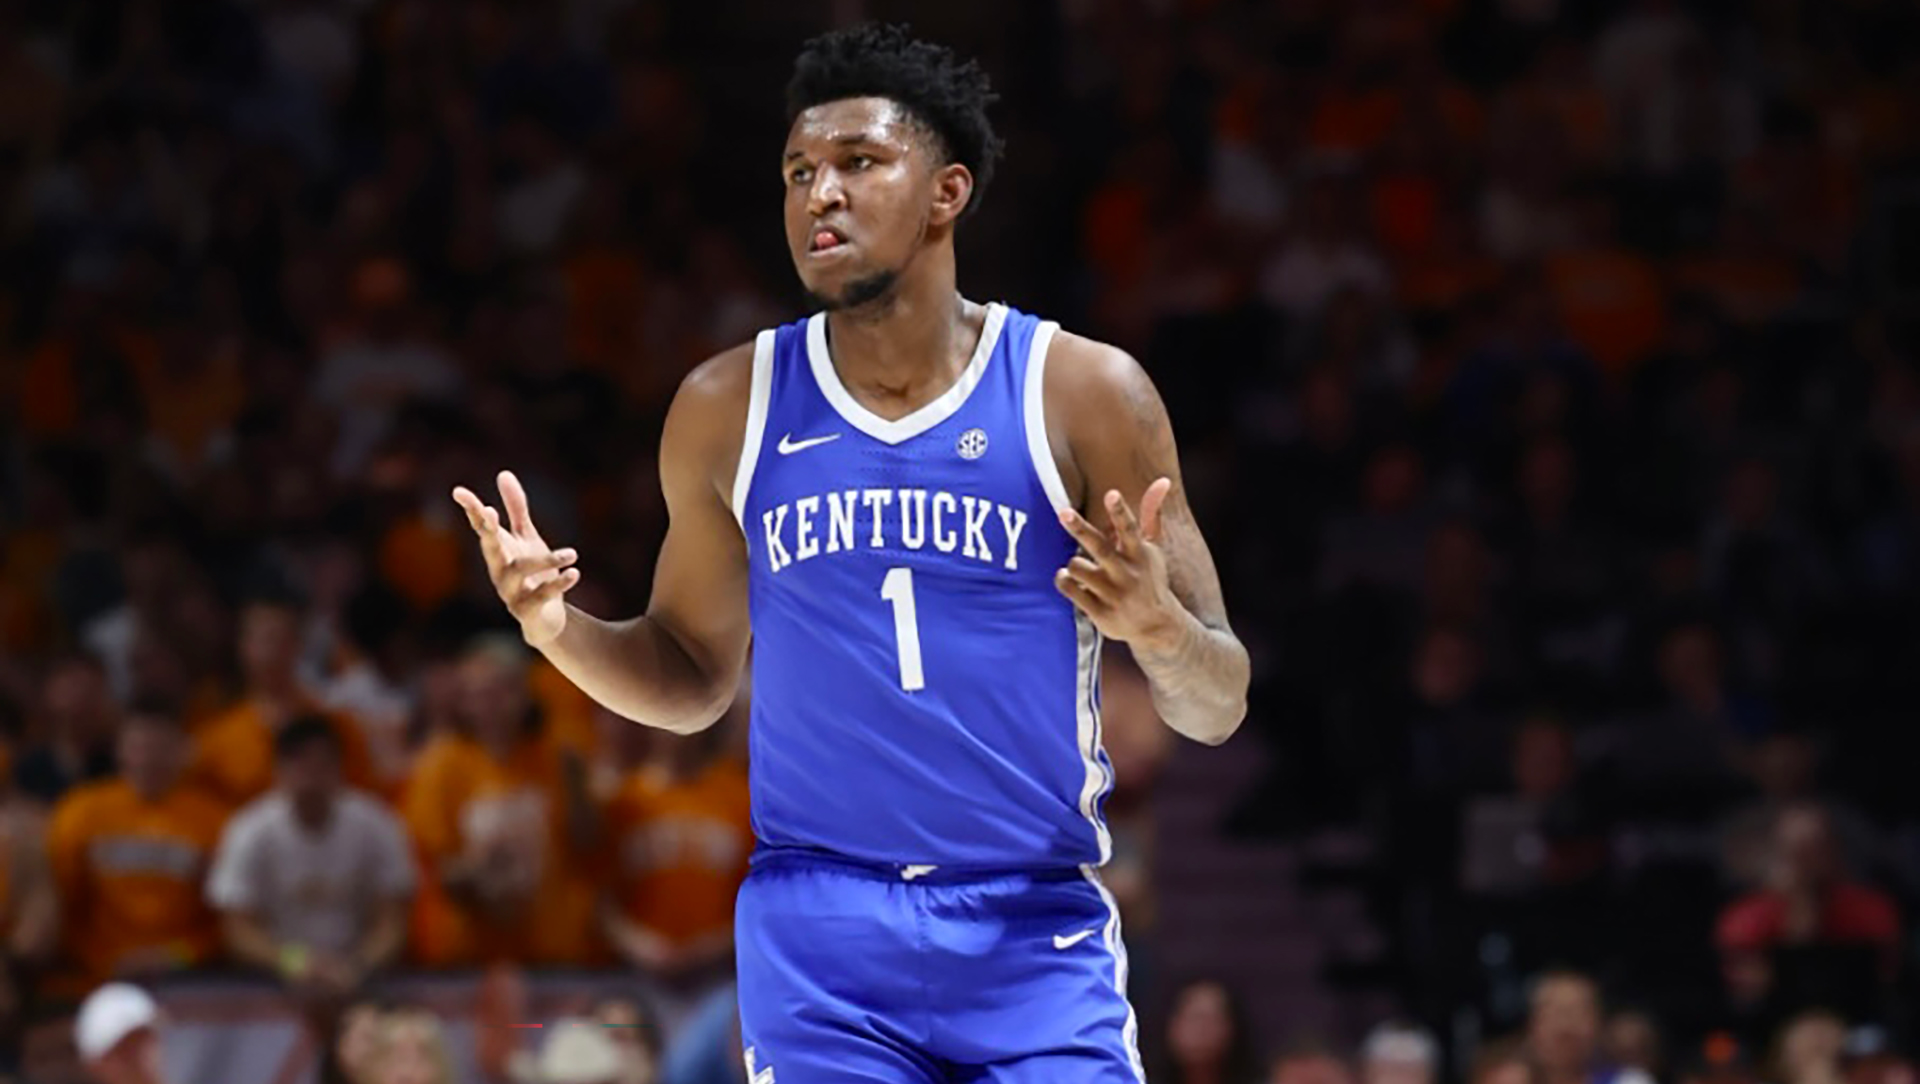 Kentucky-Tennessee Men's Basketball Postgame Notes